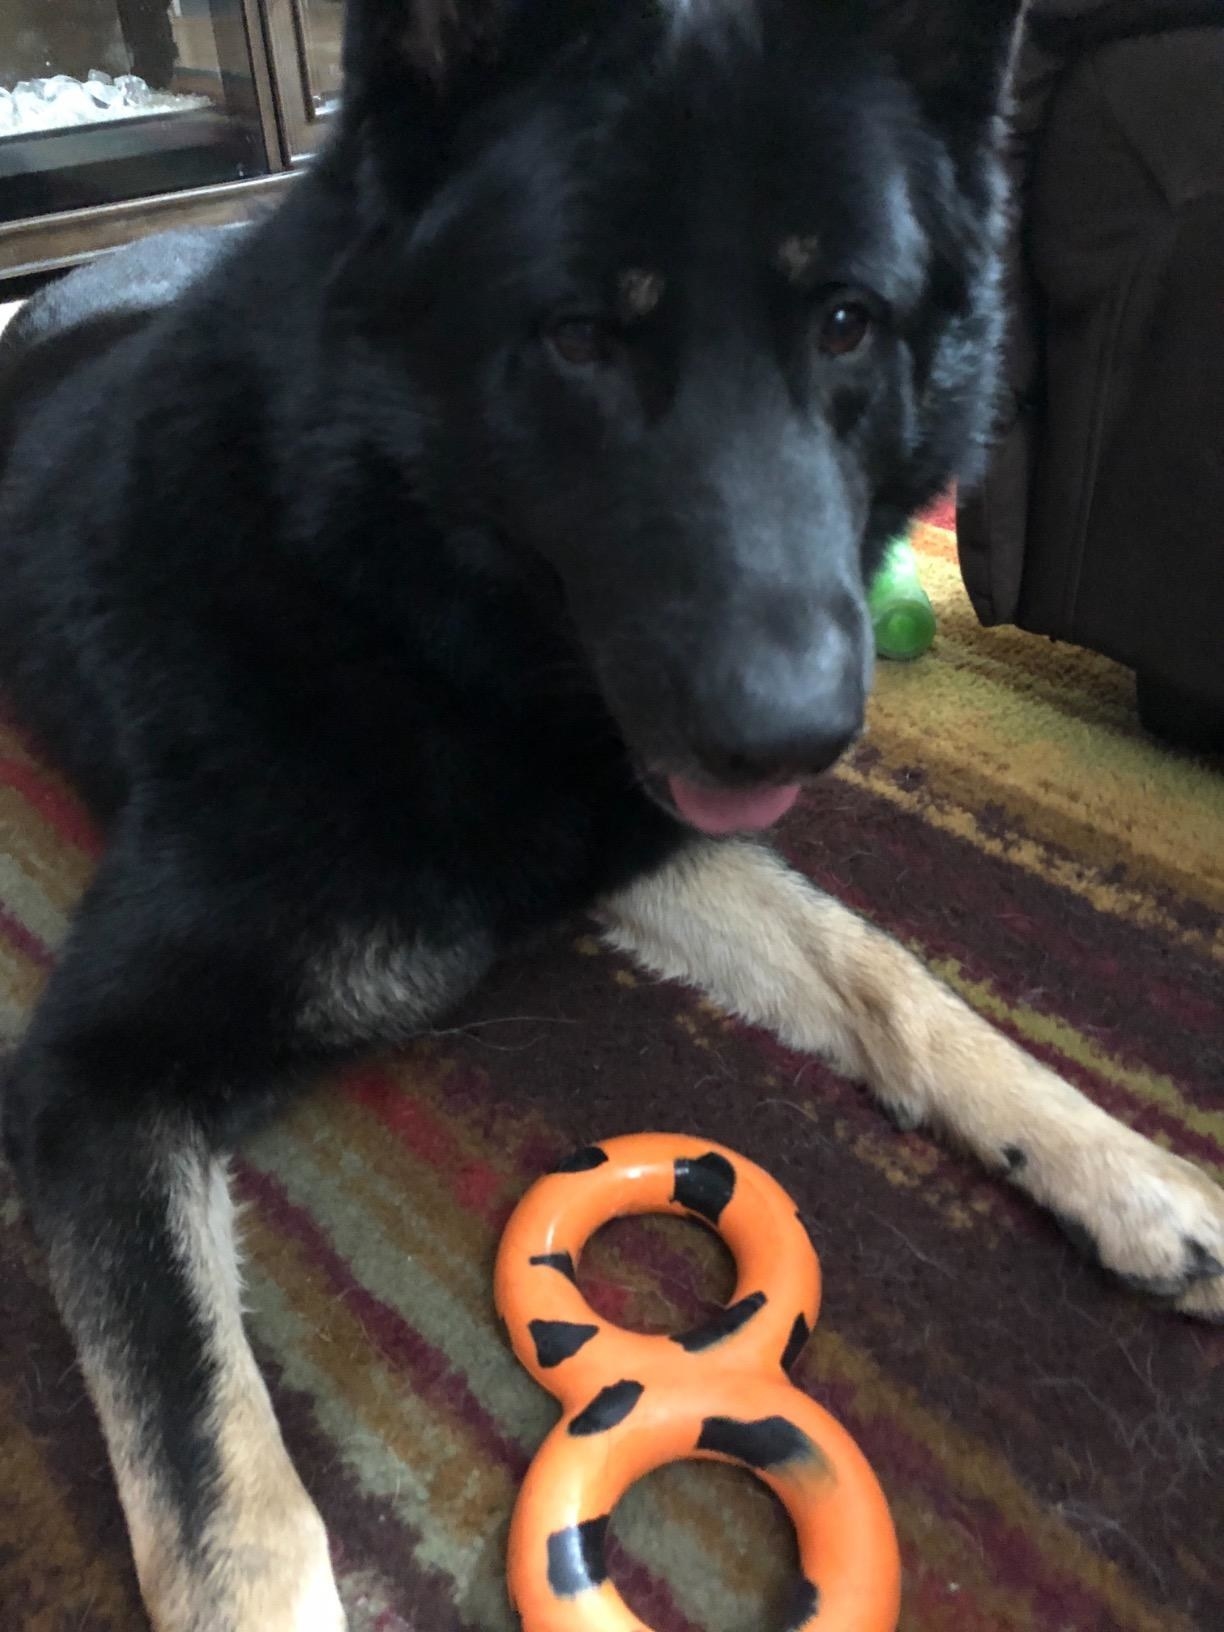 A German Shepherd with the toy, which is shaped like a figur 8